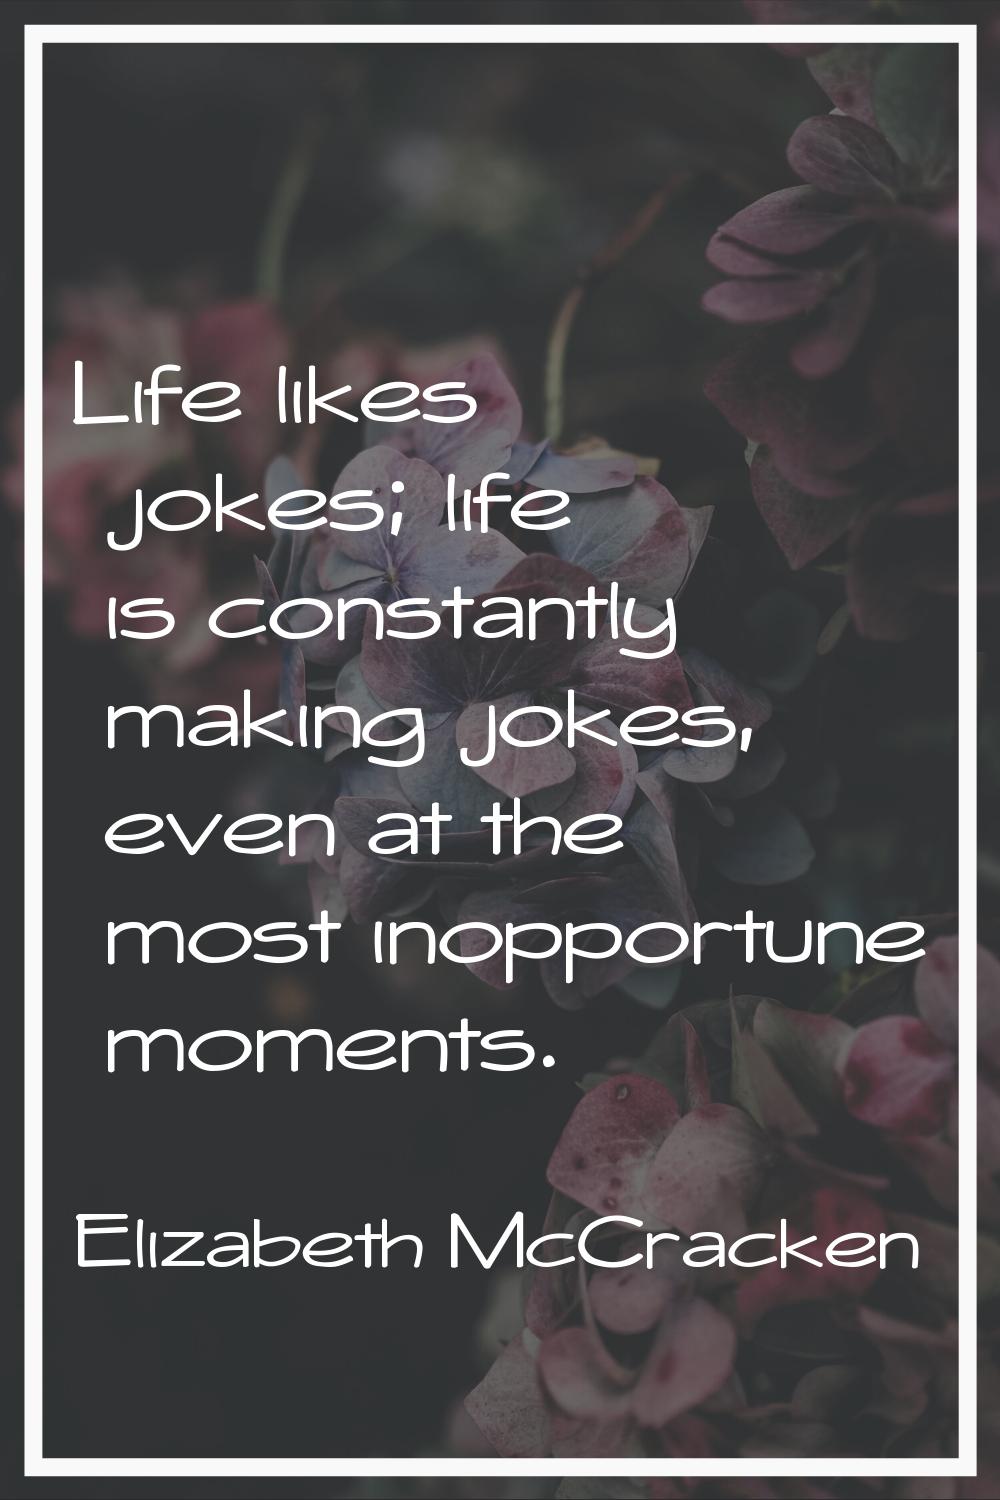 Life likes jokes; life is constantly making jokes, even at the most inopportune moments.